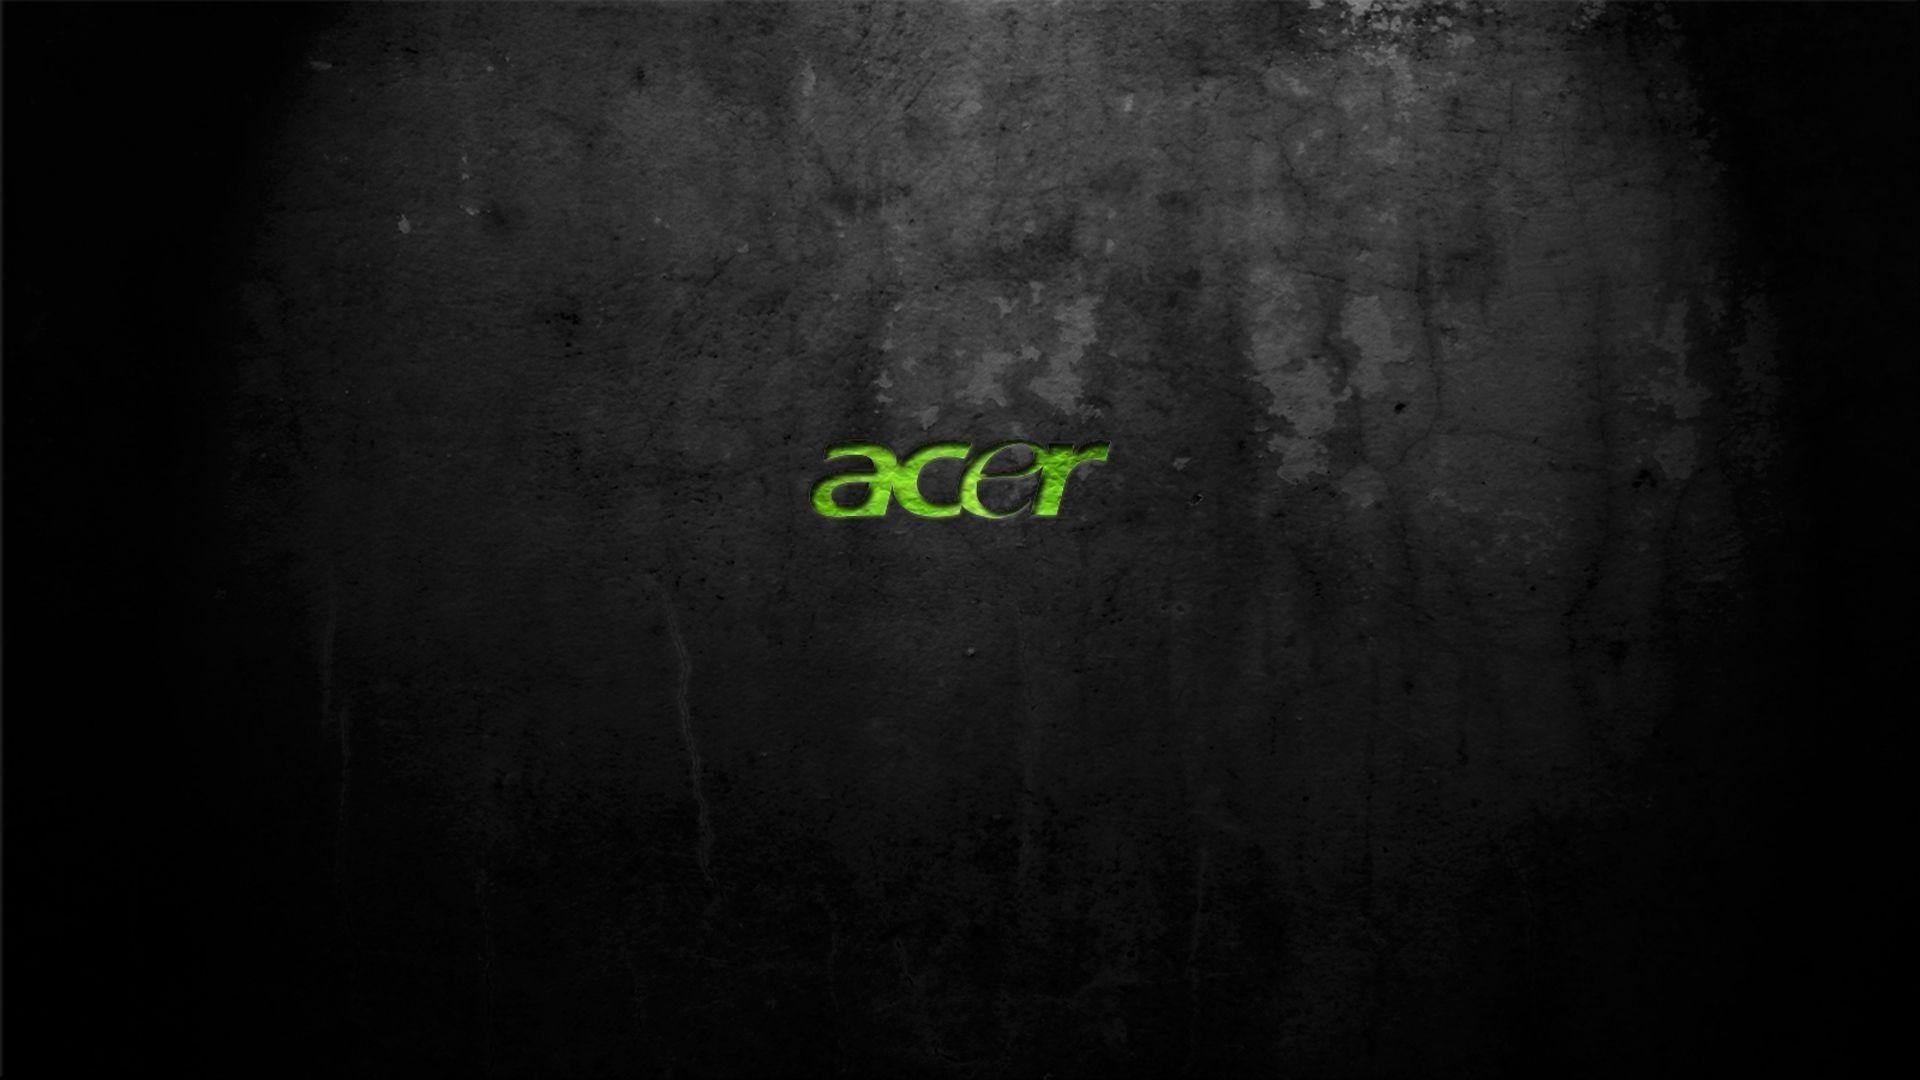 Acer Swift Wallpapers Wallpaper Cave Looking for the best apple 4k uhd wallpapers? acer swift wallpapers wallpaper cave